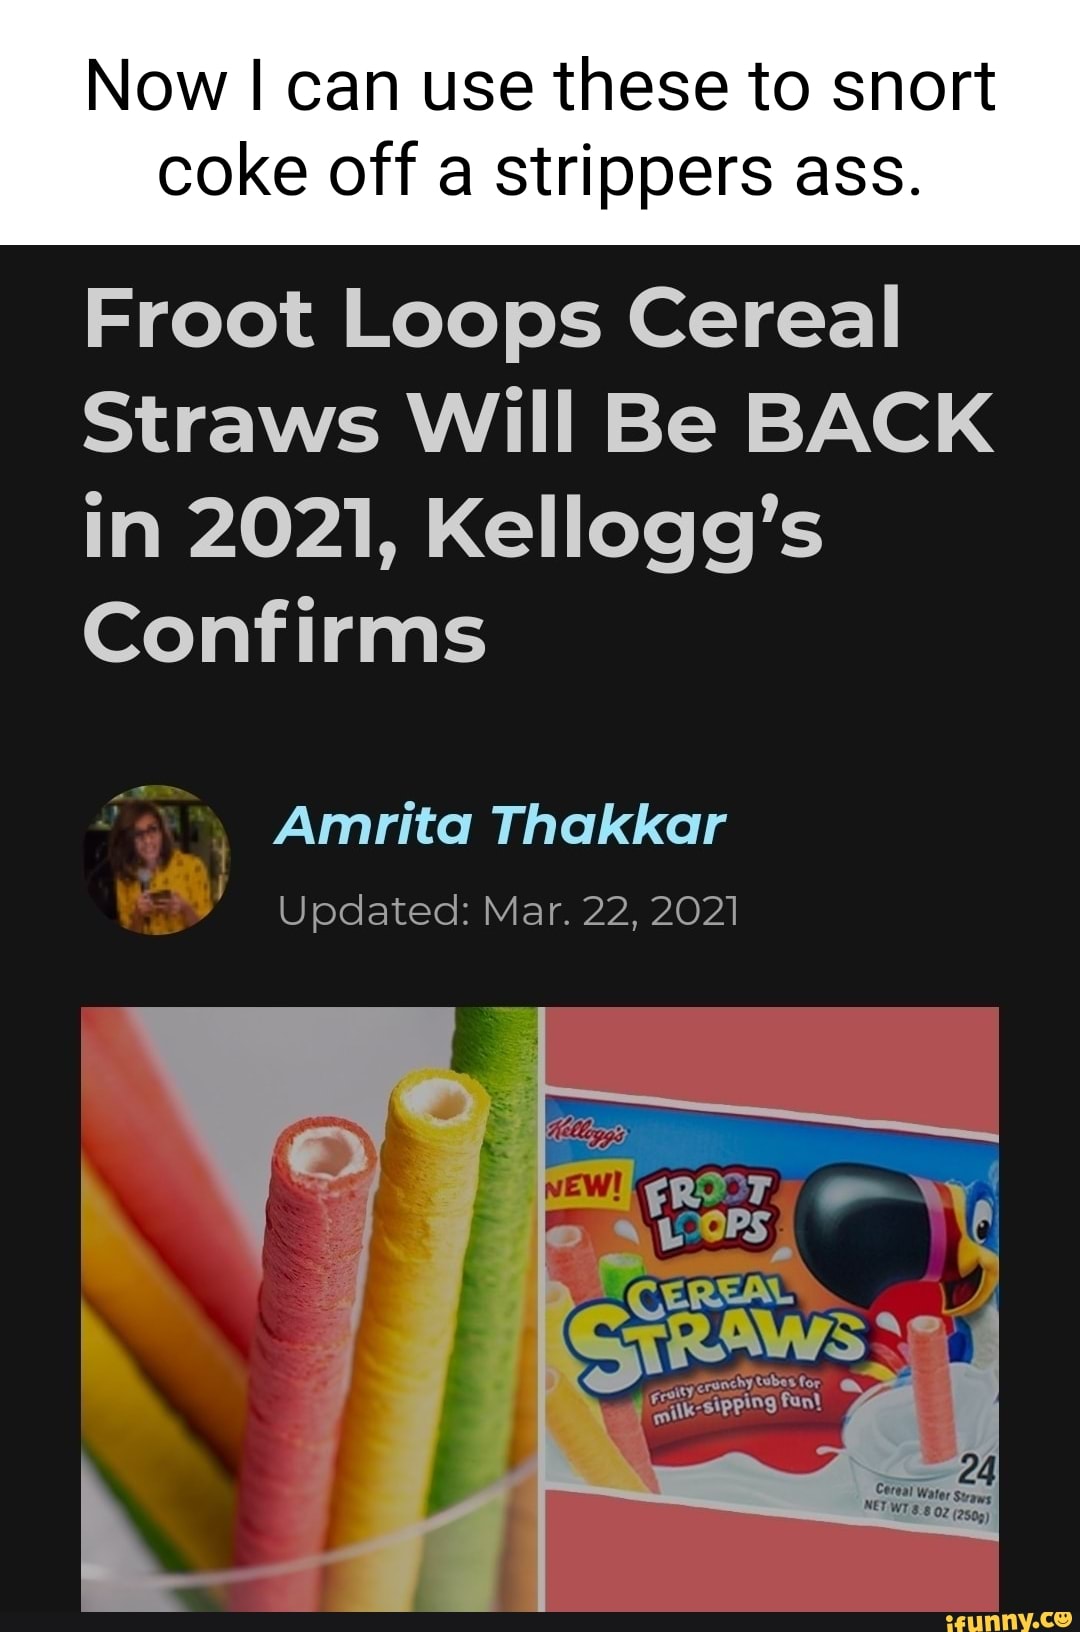 cedric lamonte recommends Froot Loops In Ass